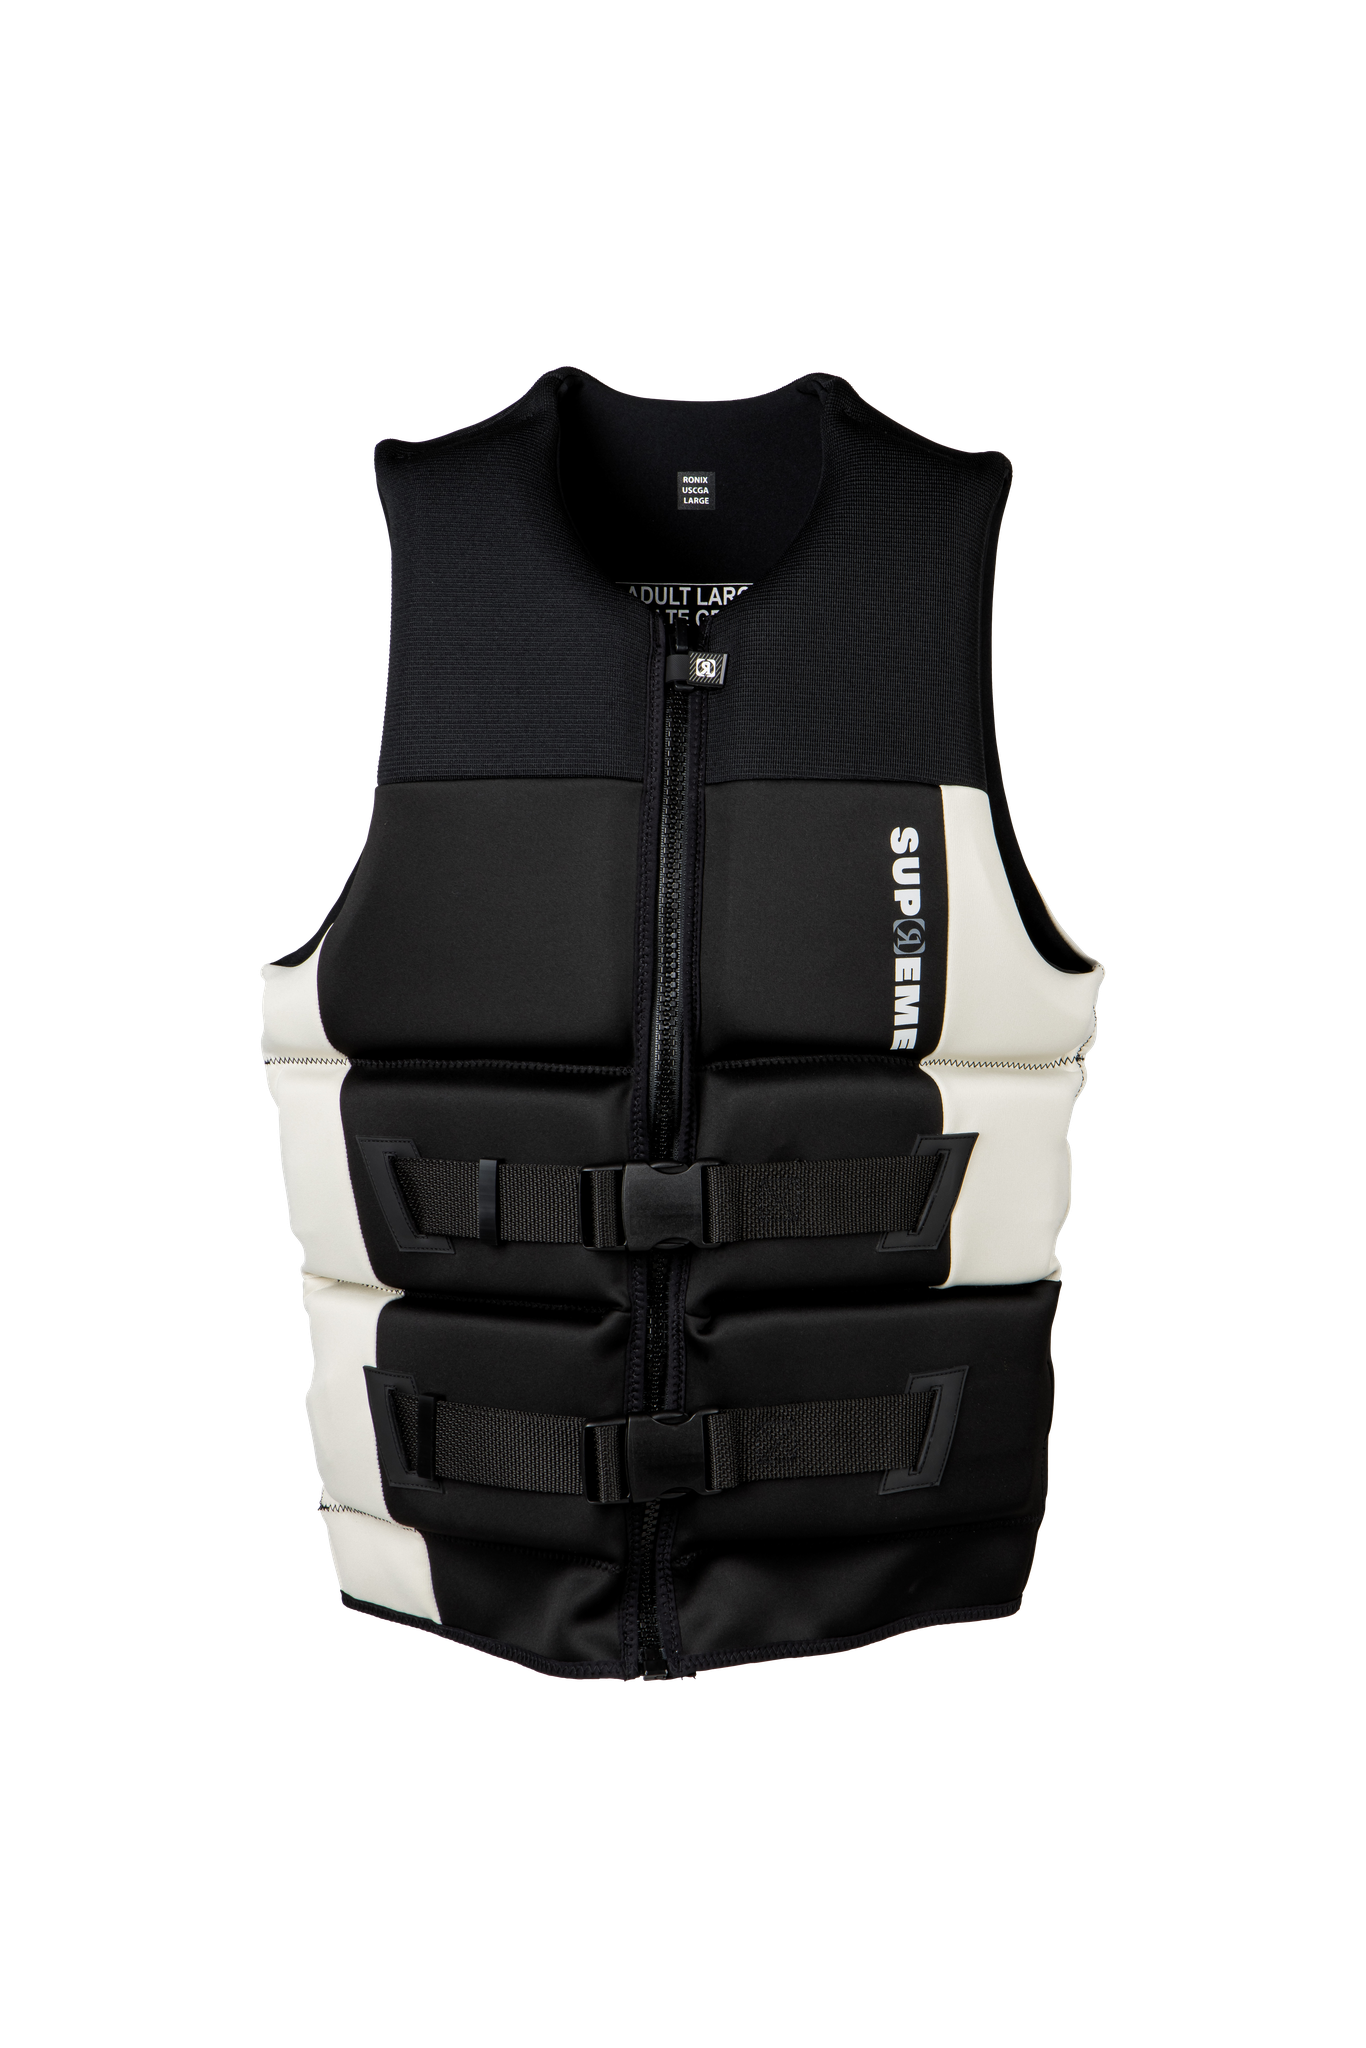 A black and white Ronix 2024 Supreme Yes Men's CGA Vest with buoyancy and mobility features on a black background.